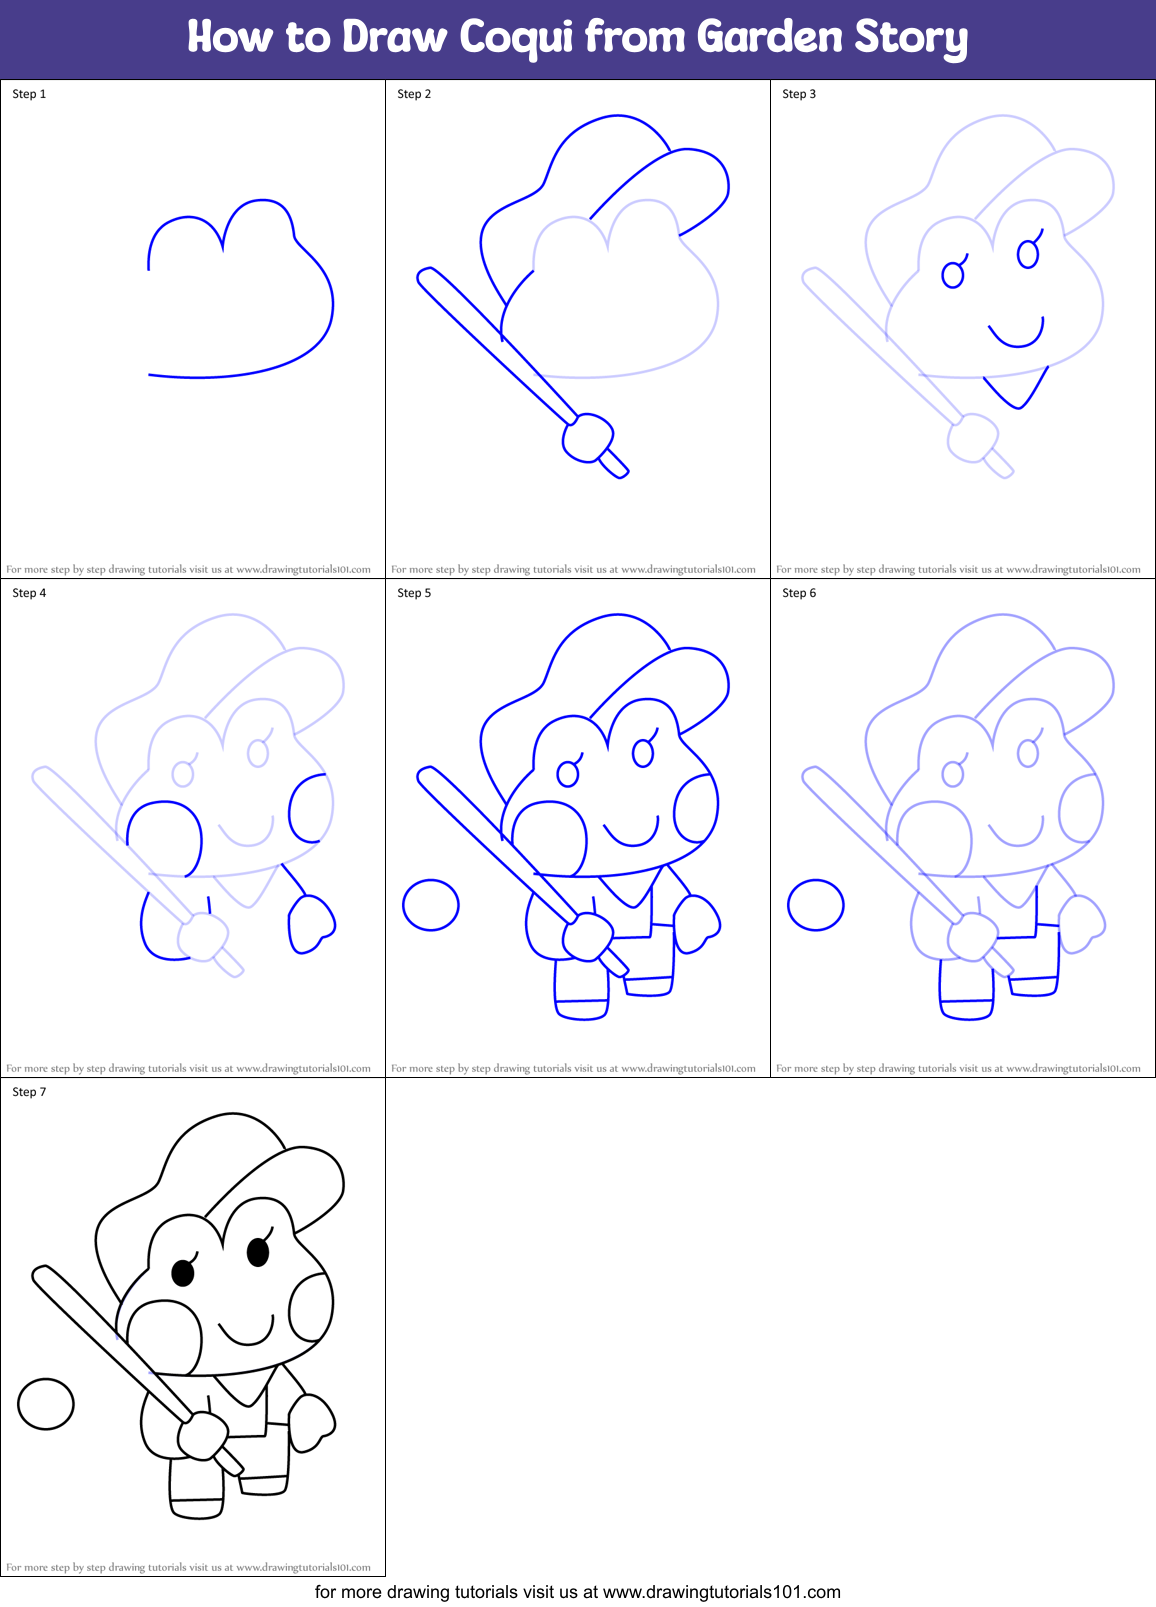 How to Draw Coqui from Garden Story (Garden Story) Step by Step ...